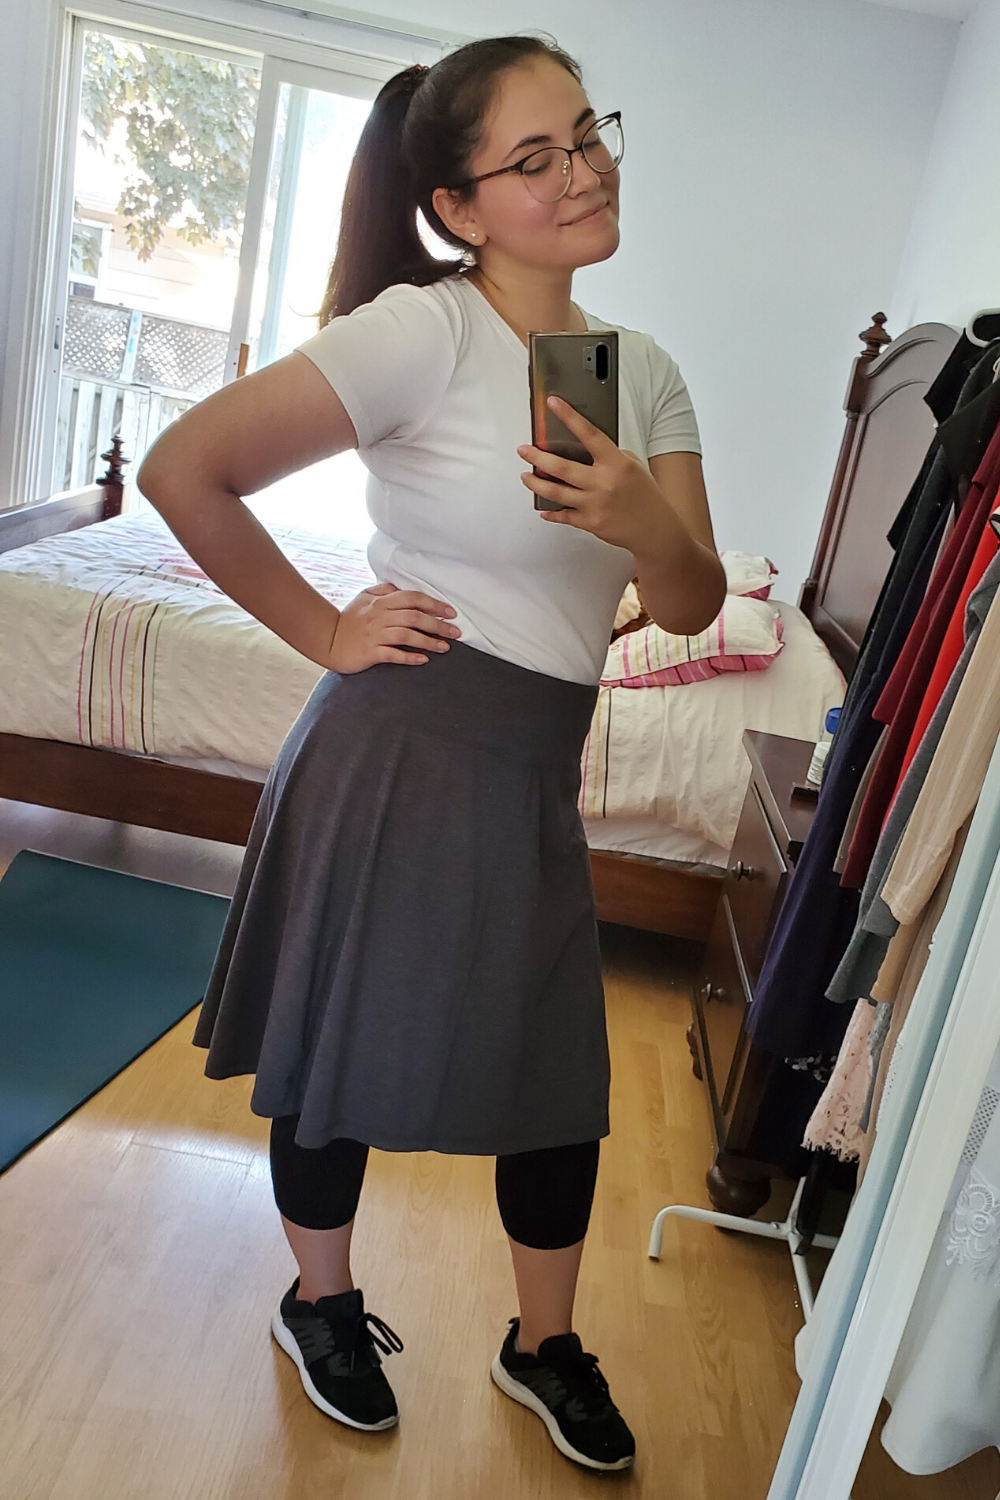 Modest Workout Outfit - Traditional Catholic Modesty and Femininity - Grey Knee Length Lounge Skirt with Leggings, White T-Shirt and Black Adidas Sneakers